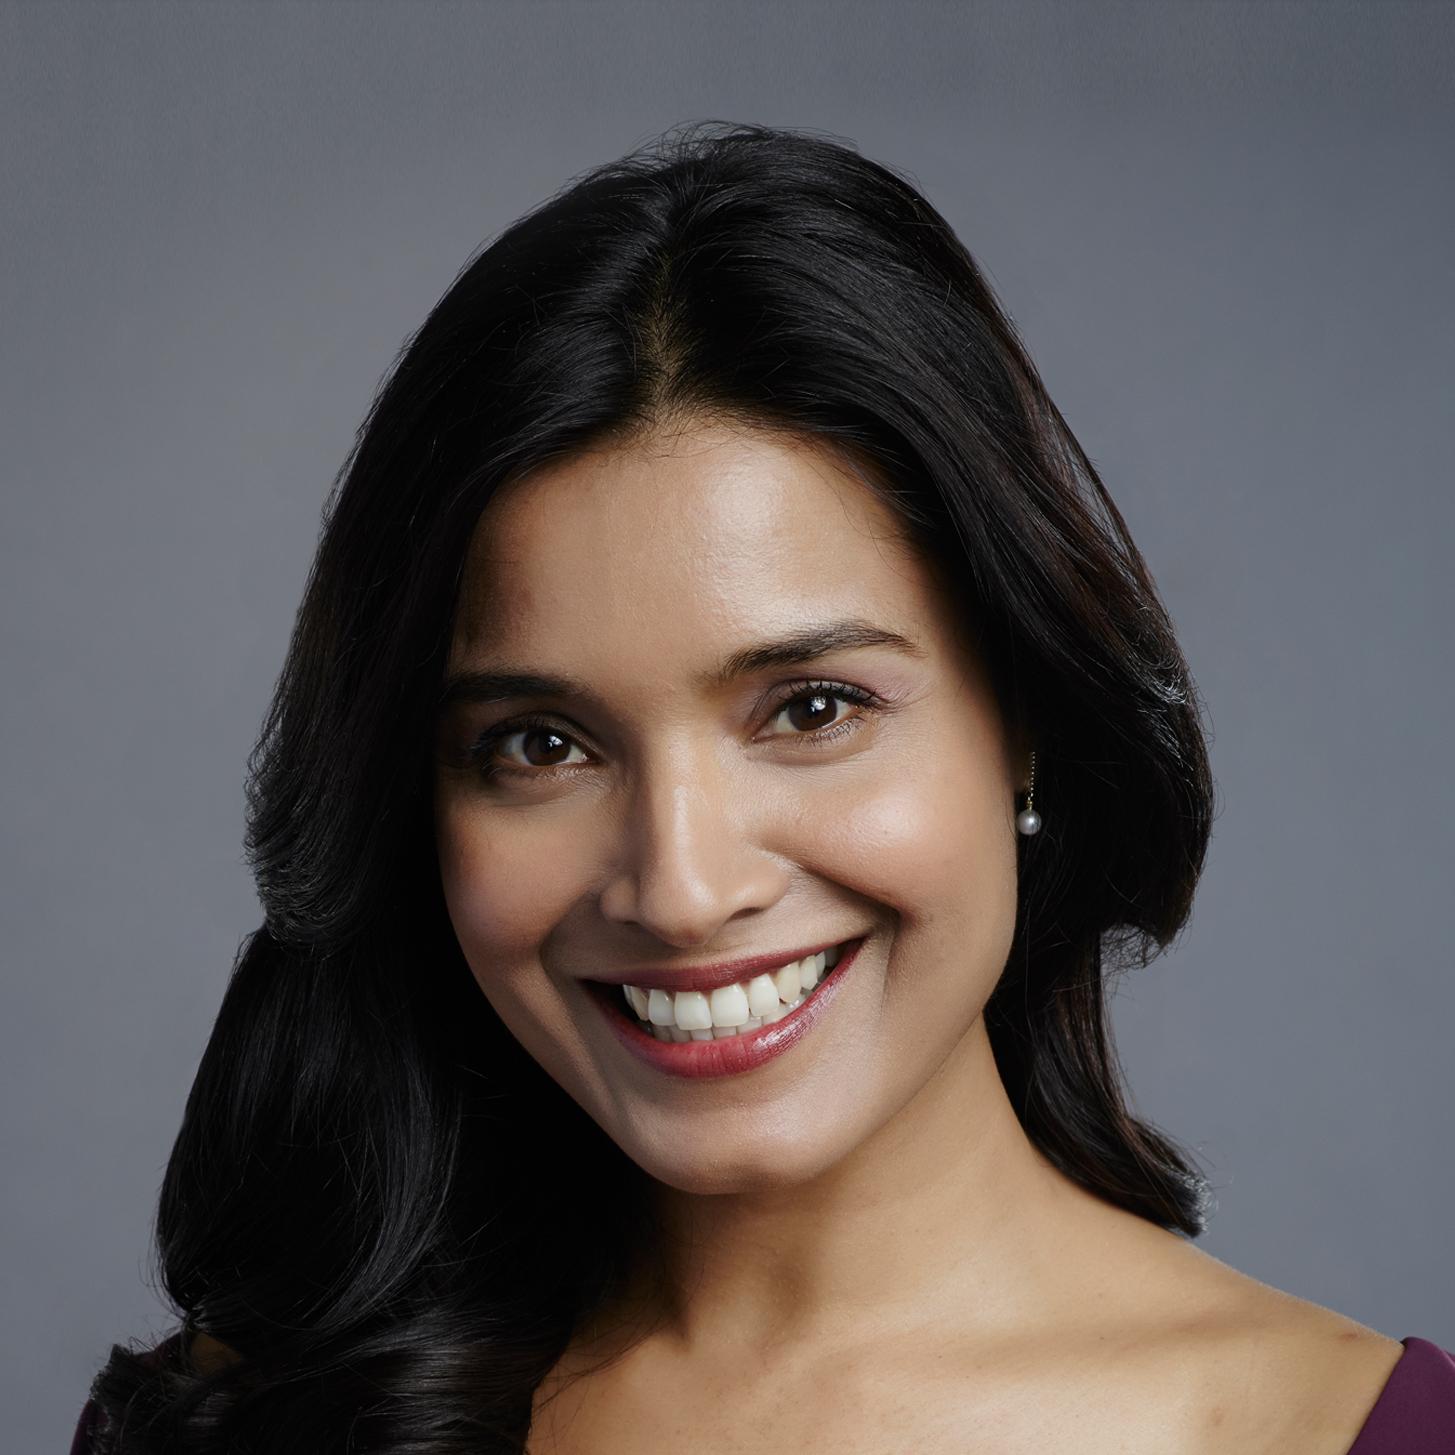 Pictures of Shelley Conn.